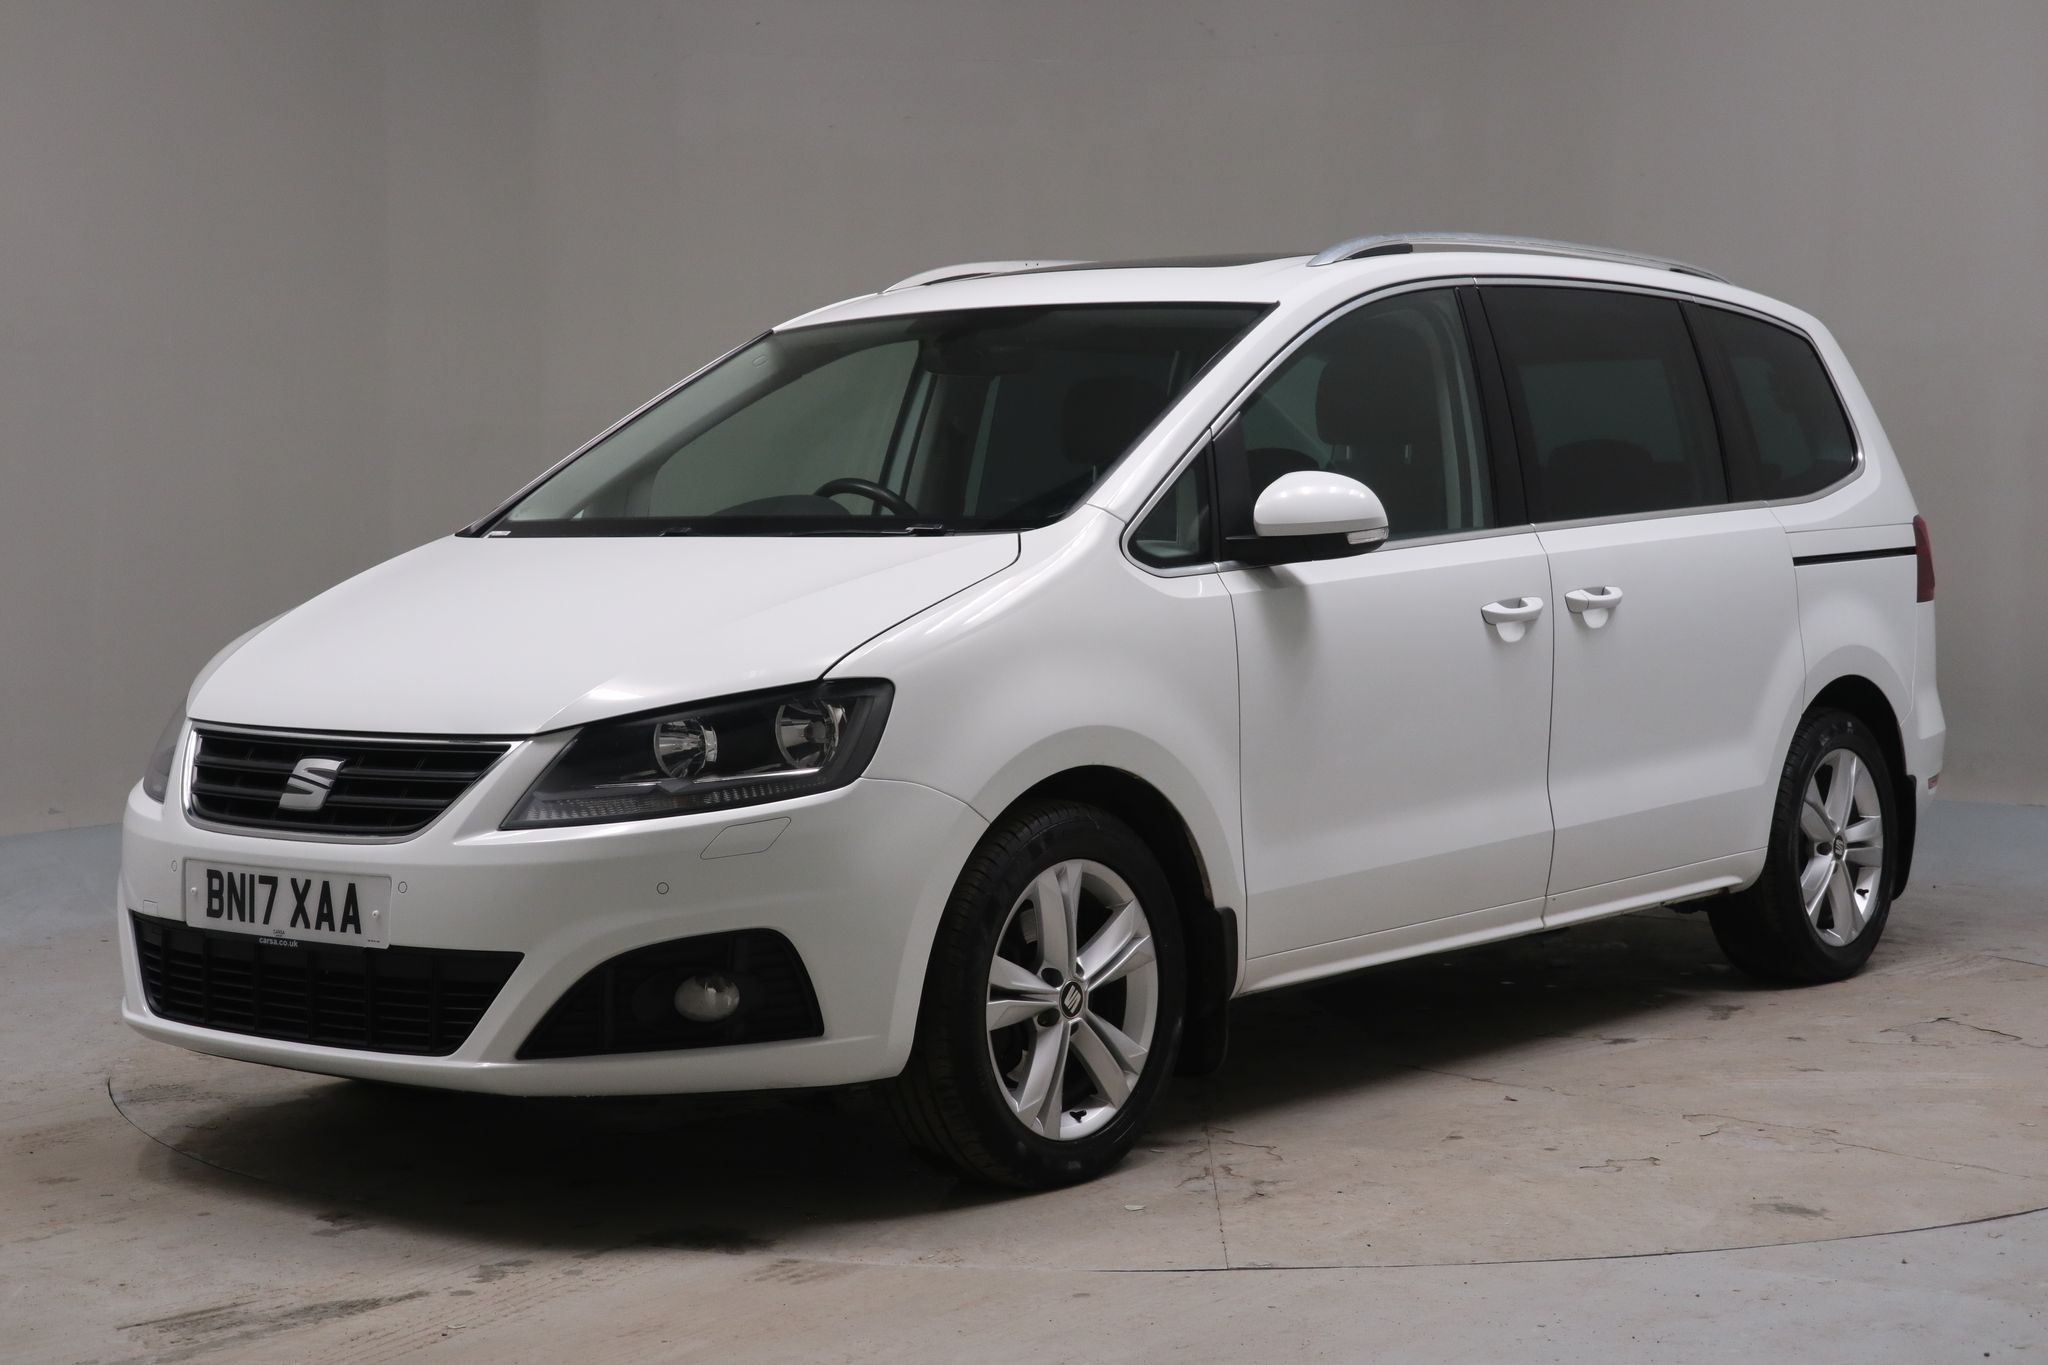 2017 used Seat Alhambra 2.0 TDI XCELLENCE DSG (150 ps)